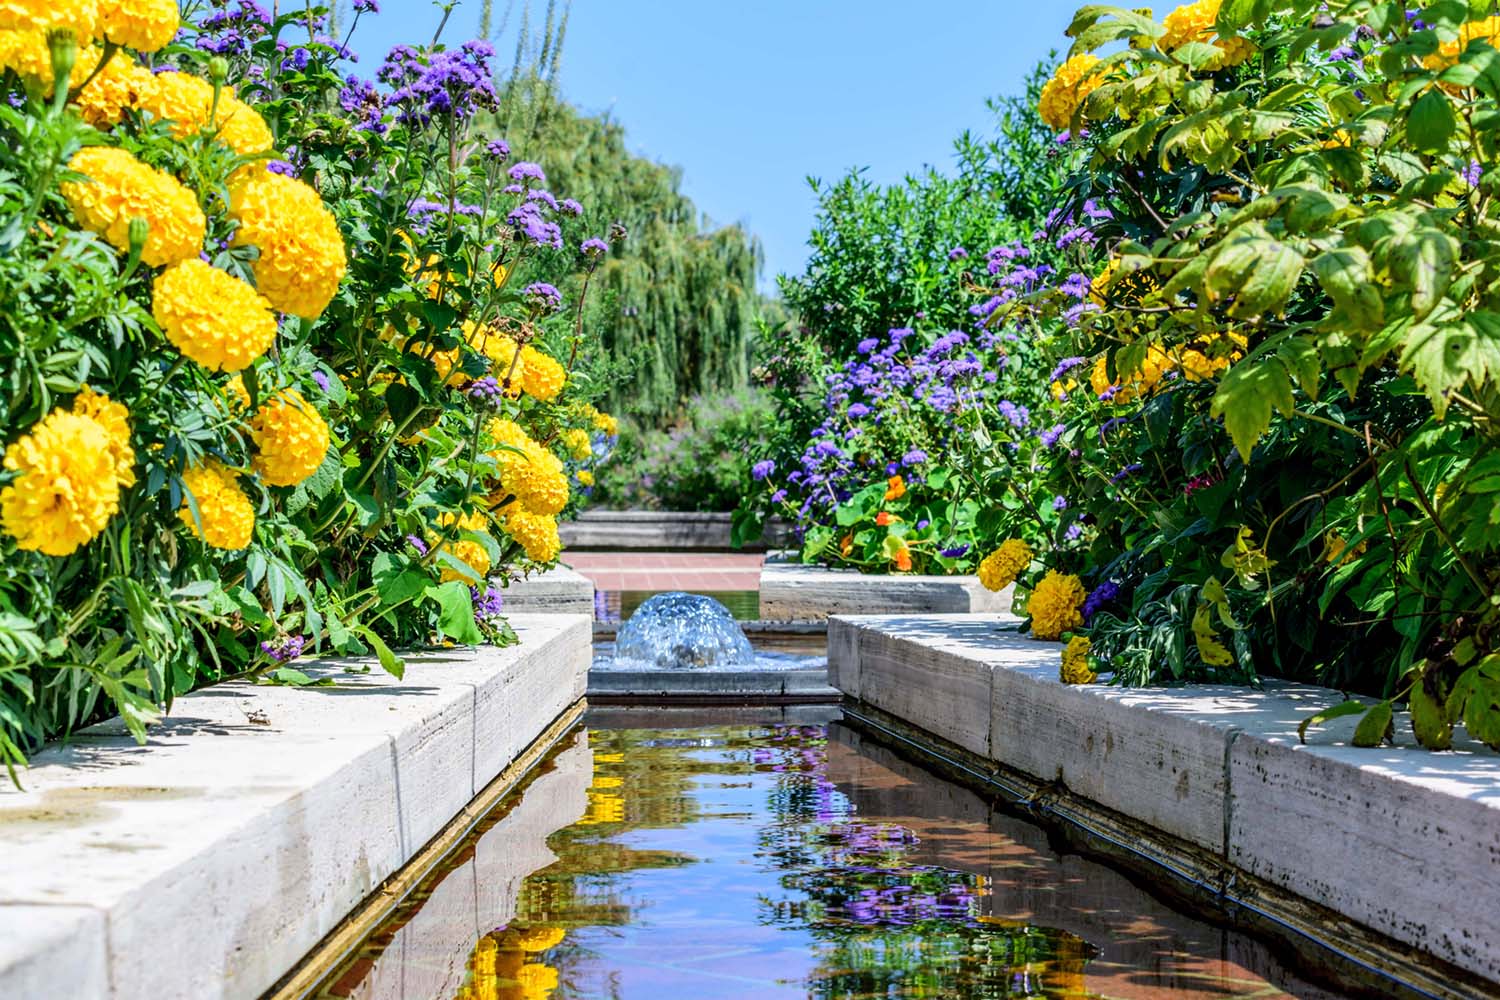 seattle hardscapes fountain with beautiful yellow and purple flowers 2022 11 07 05 22 52 utc stock photo placeholder